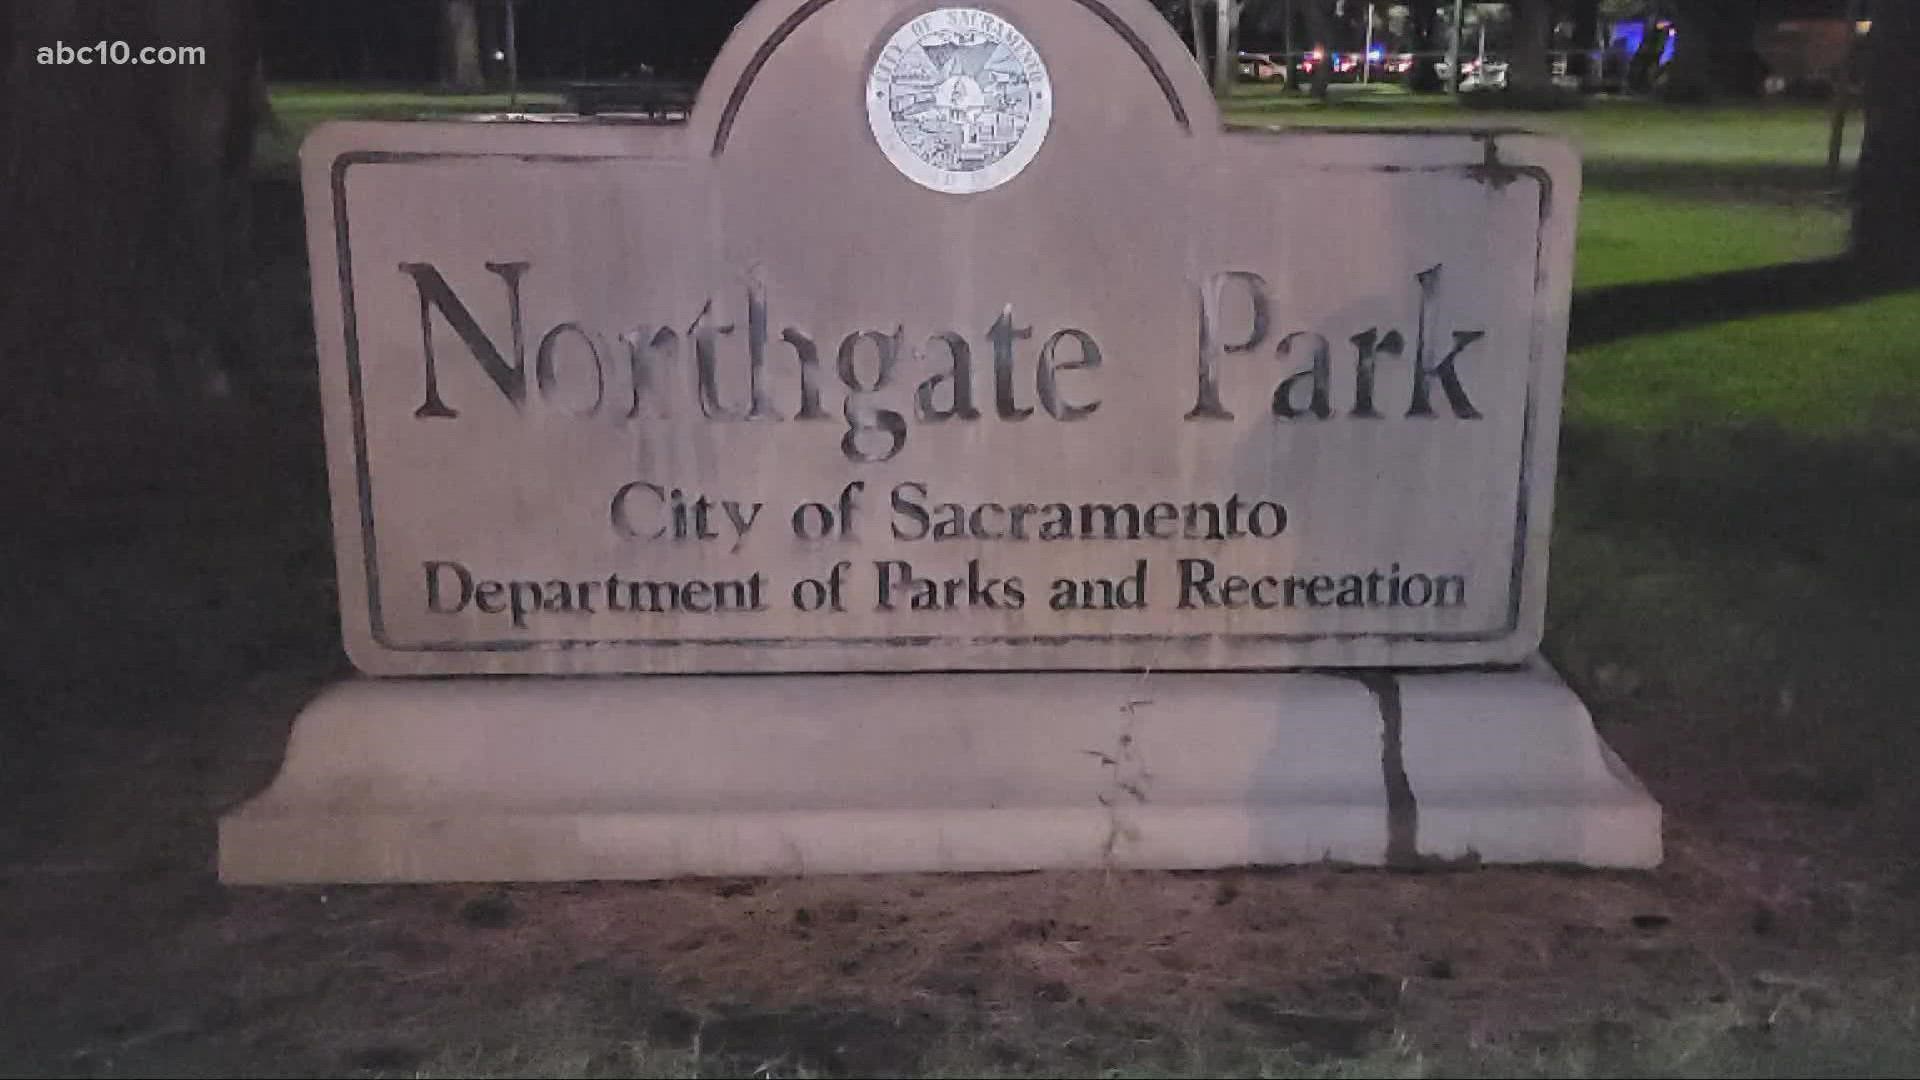 The fight took place late Thursday, Sept. 23, in Northgate Park.